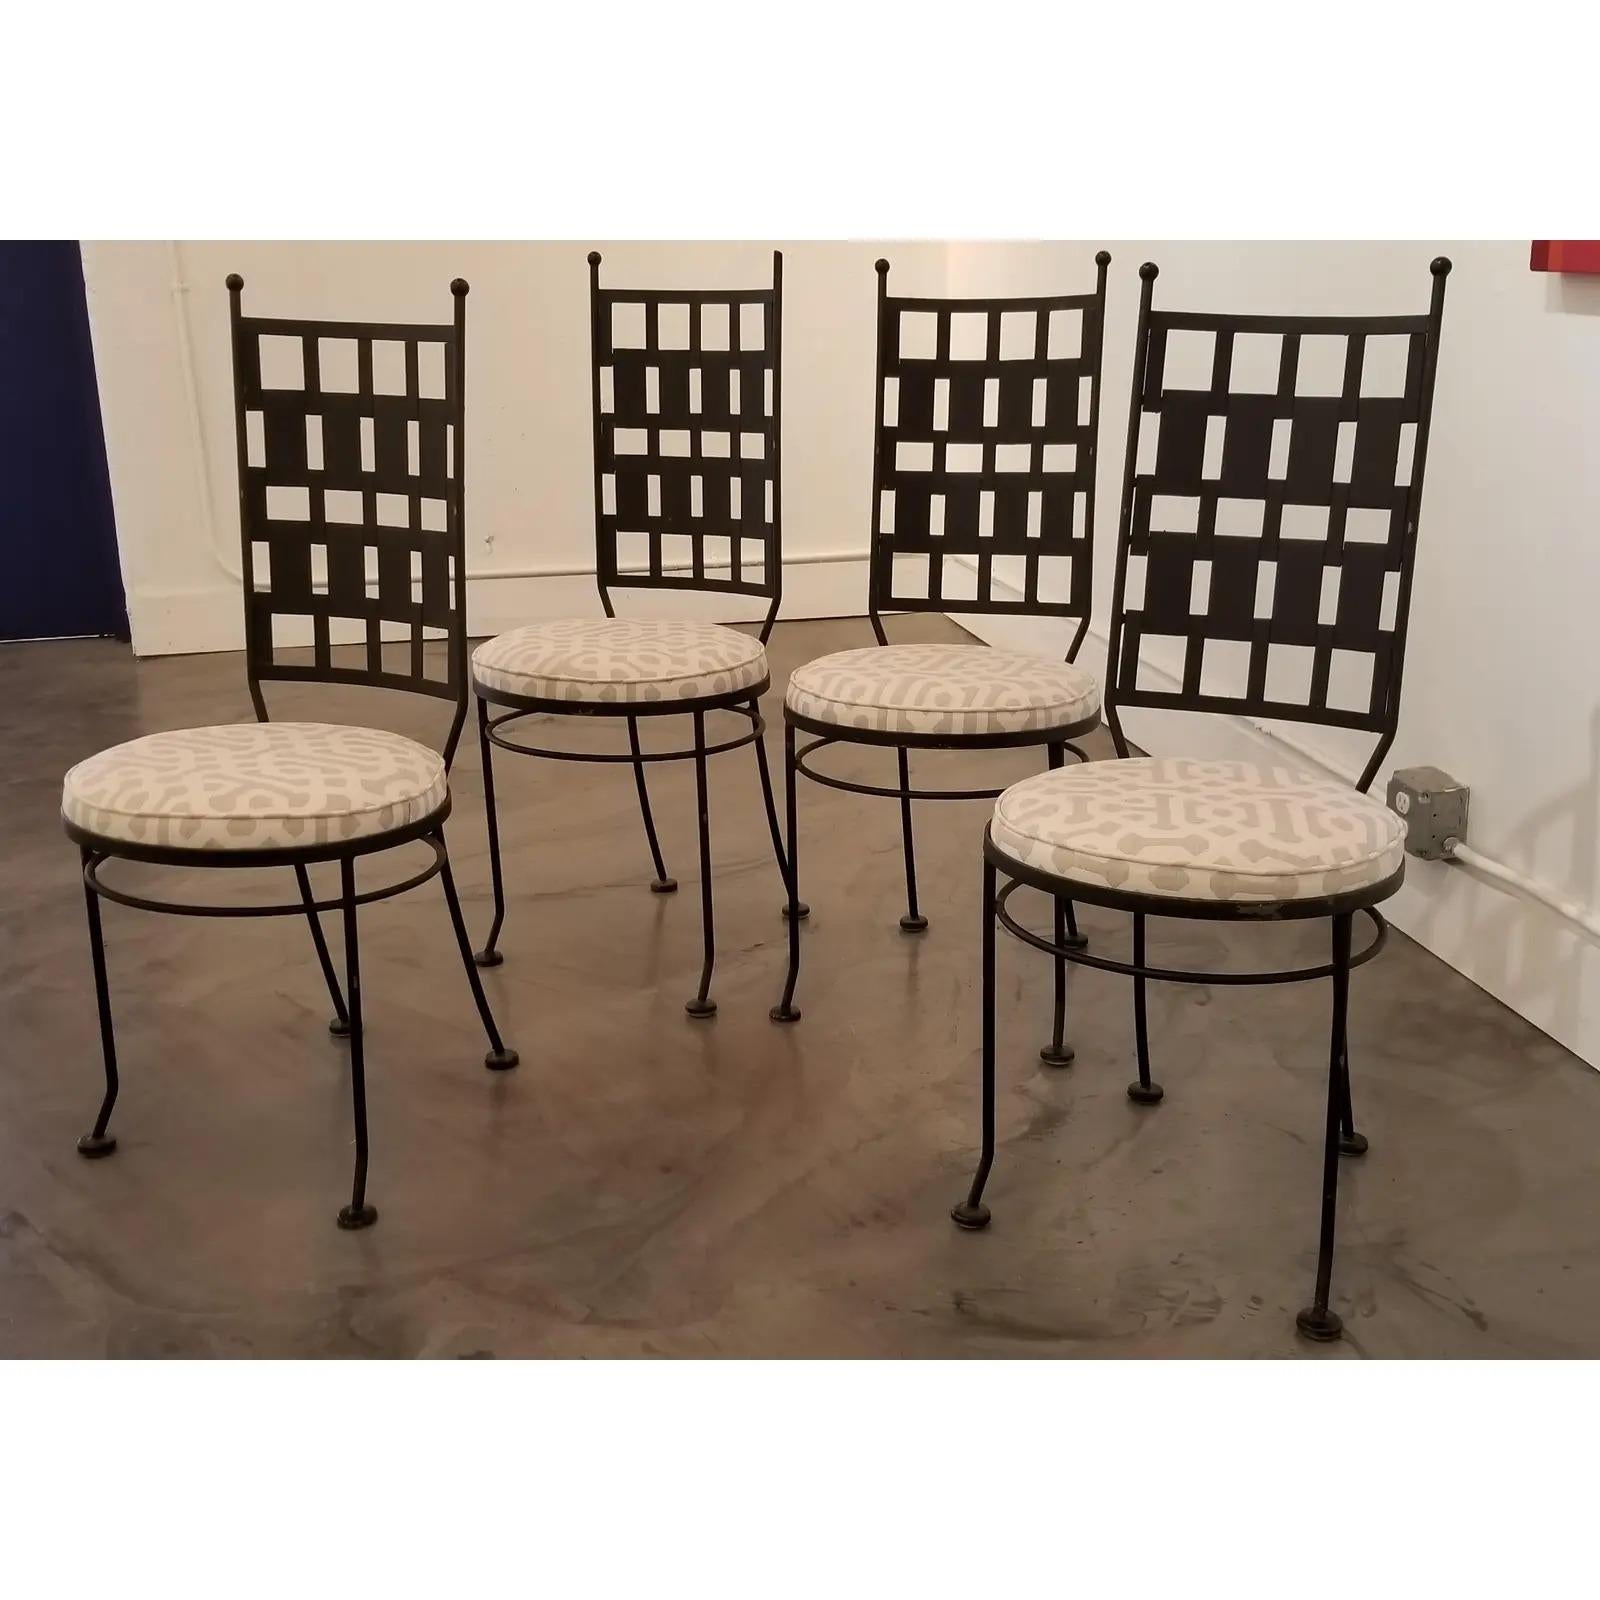 A set of 4 geometric iron and steel Brutalist patio or dining chairs by Maurizio Tempestini, circa 1960s. Newly upholstered seats with Sunbrella material. All original foot glides intact, missing one finial.